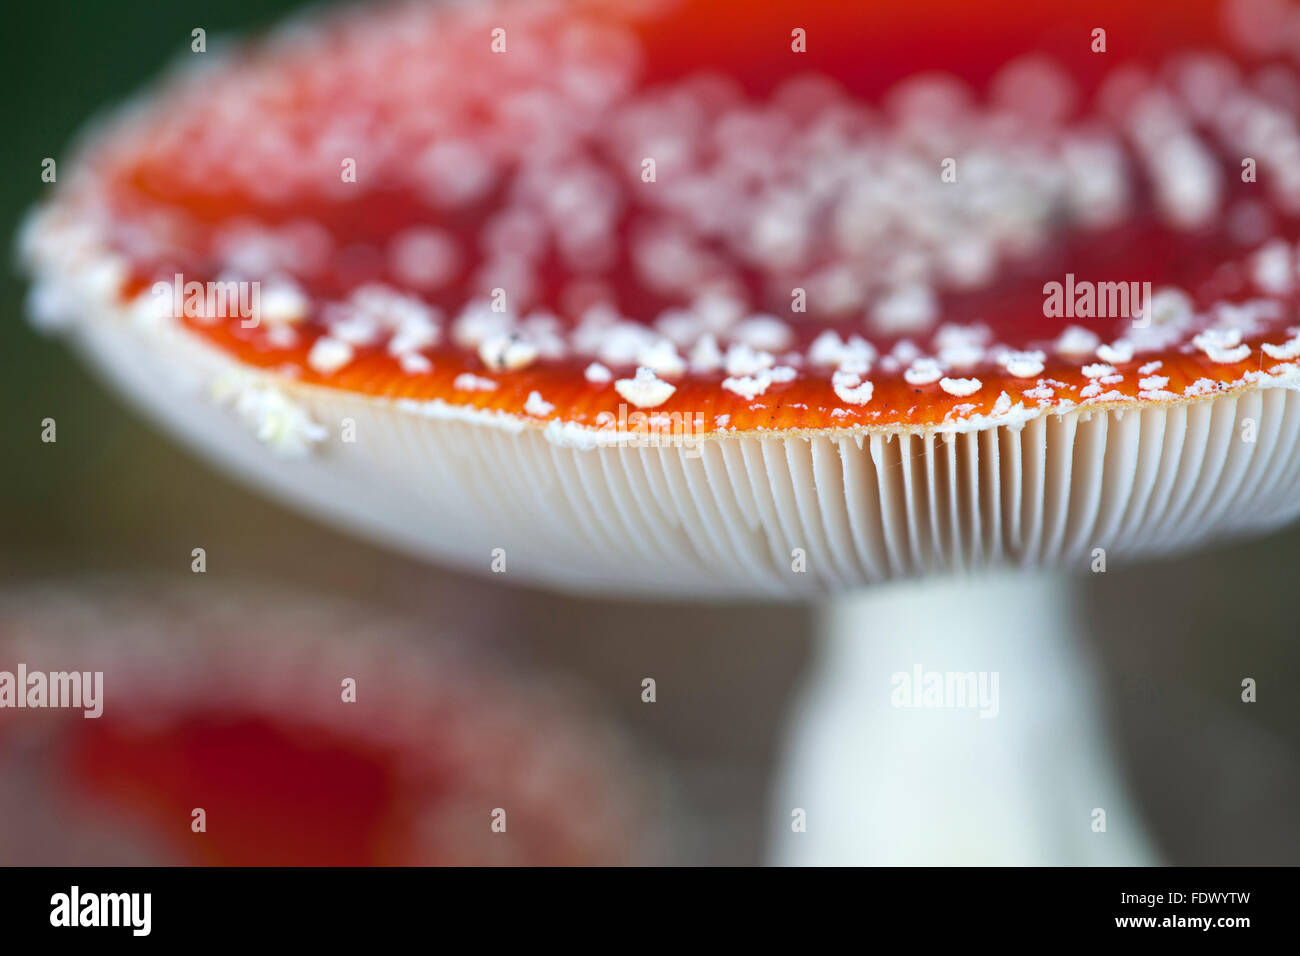 Fly / fly agaric (Amanita Amanita muscaria) close up montrant les verrues et les branchies blanches Banque D'Images